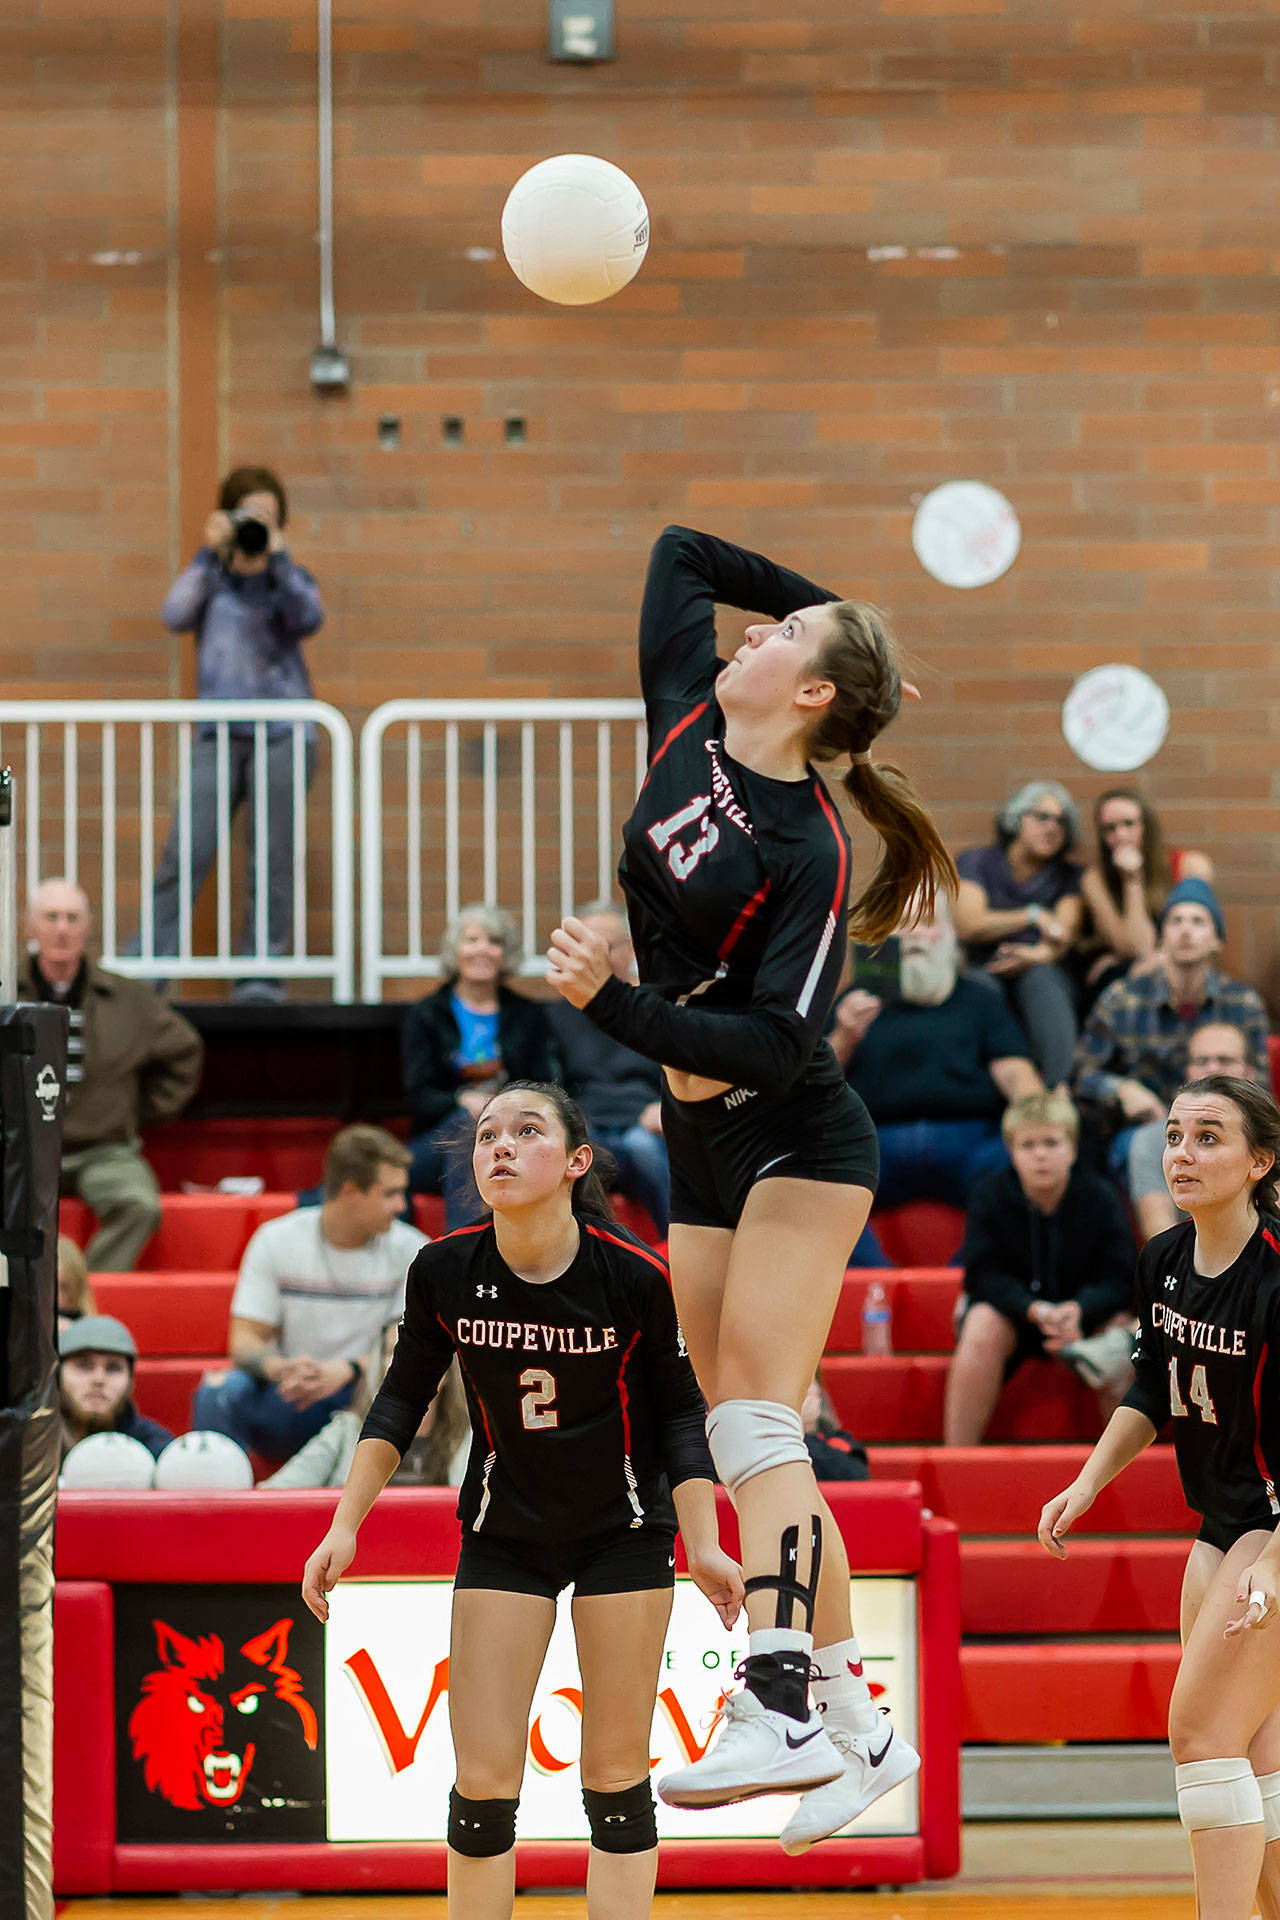 Emma Smith hits against Sultan as Scout Smith (2) and Ashley Menges (14) look on.(Photo by John Fisken)